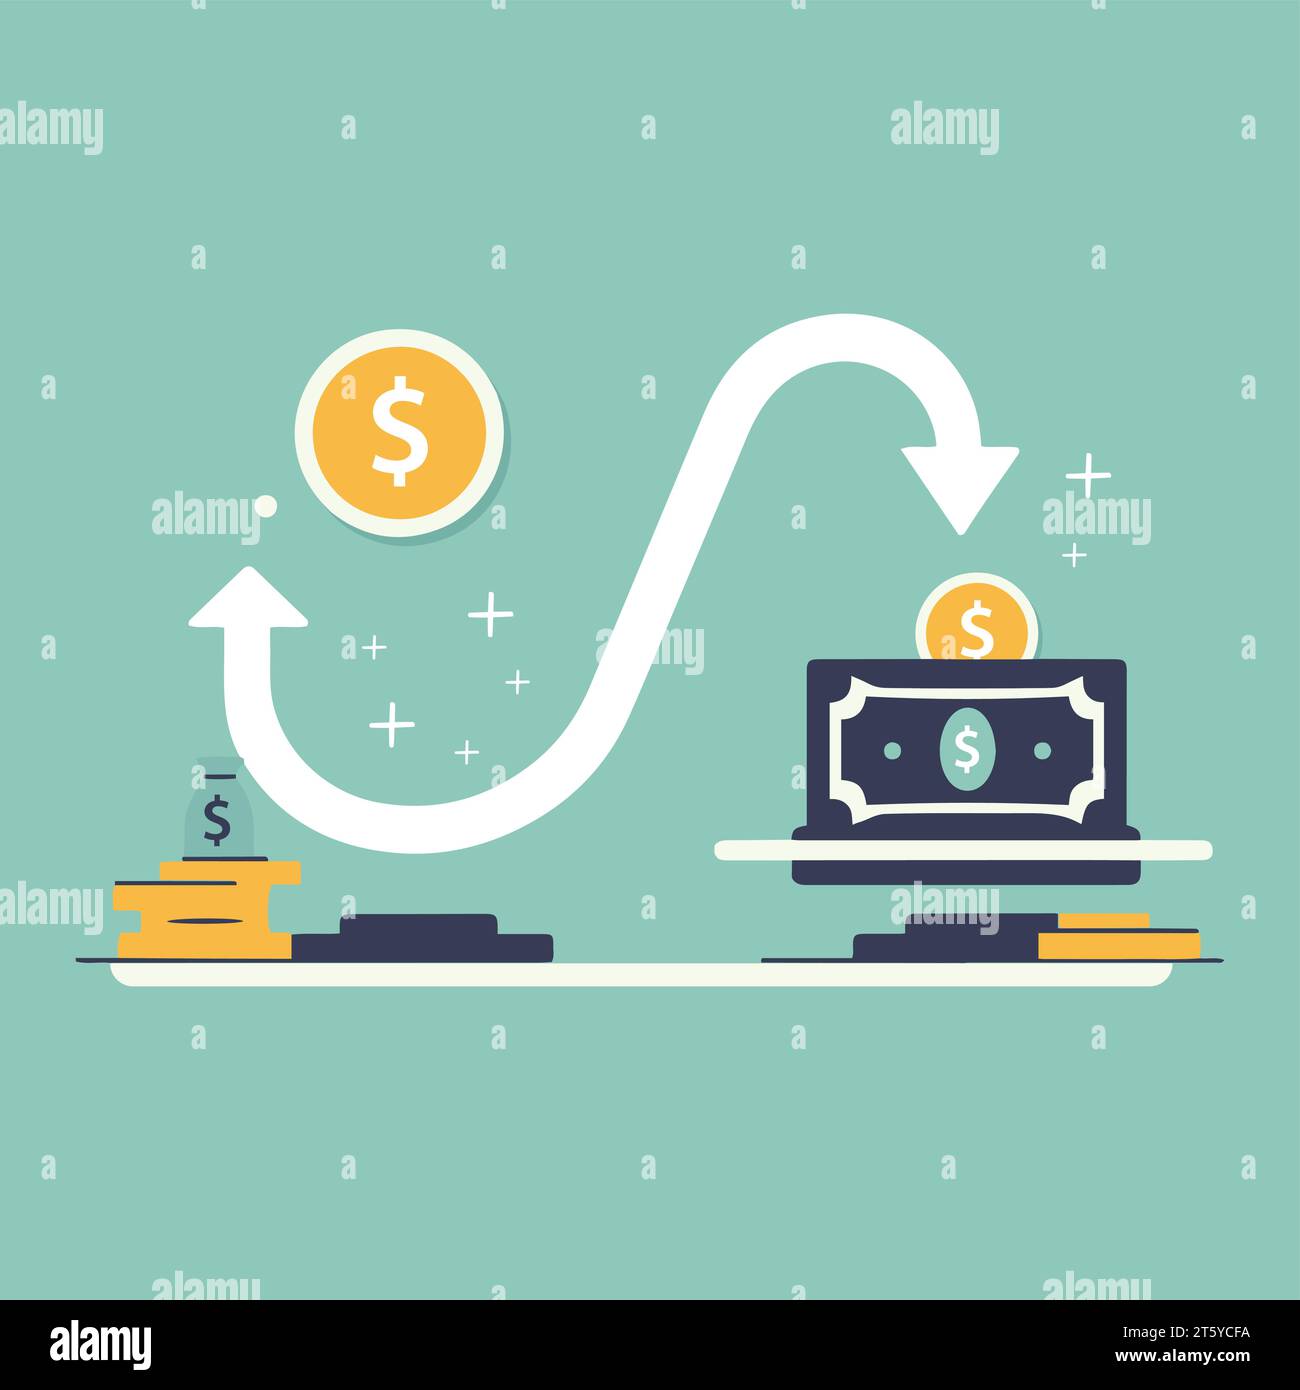 coin dollar cash flow money simple flat style vector of illustration of side hustle make and earn money concept, financial concept of cash, active pas Stock Vector